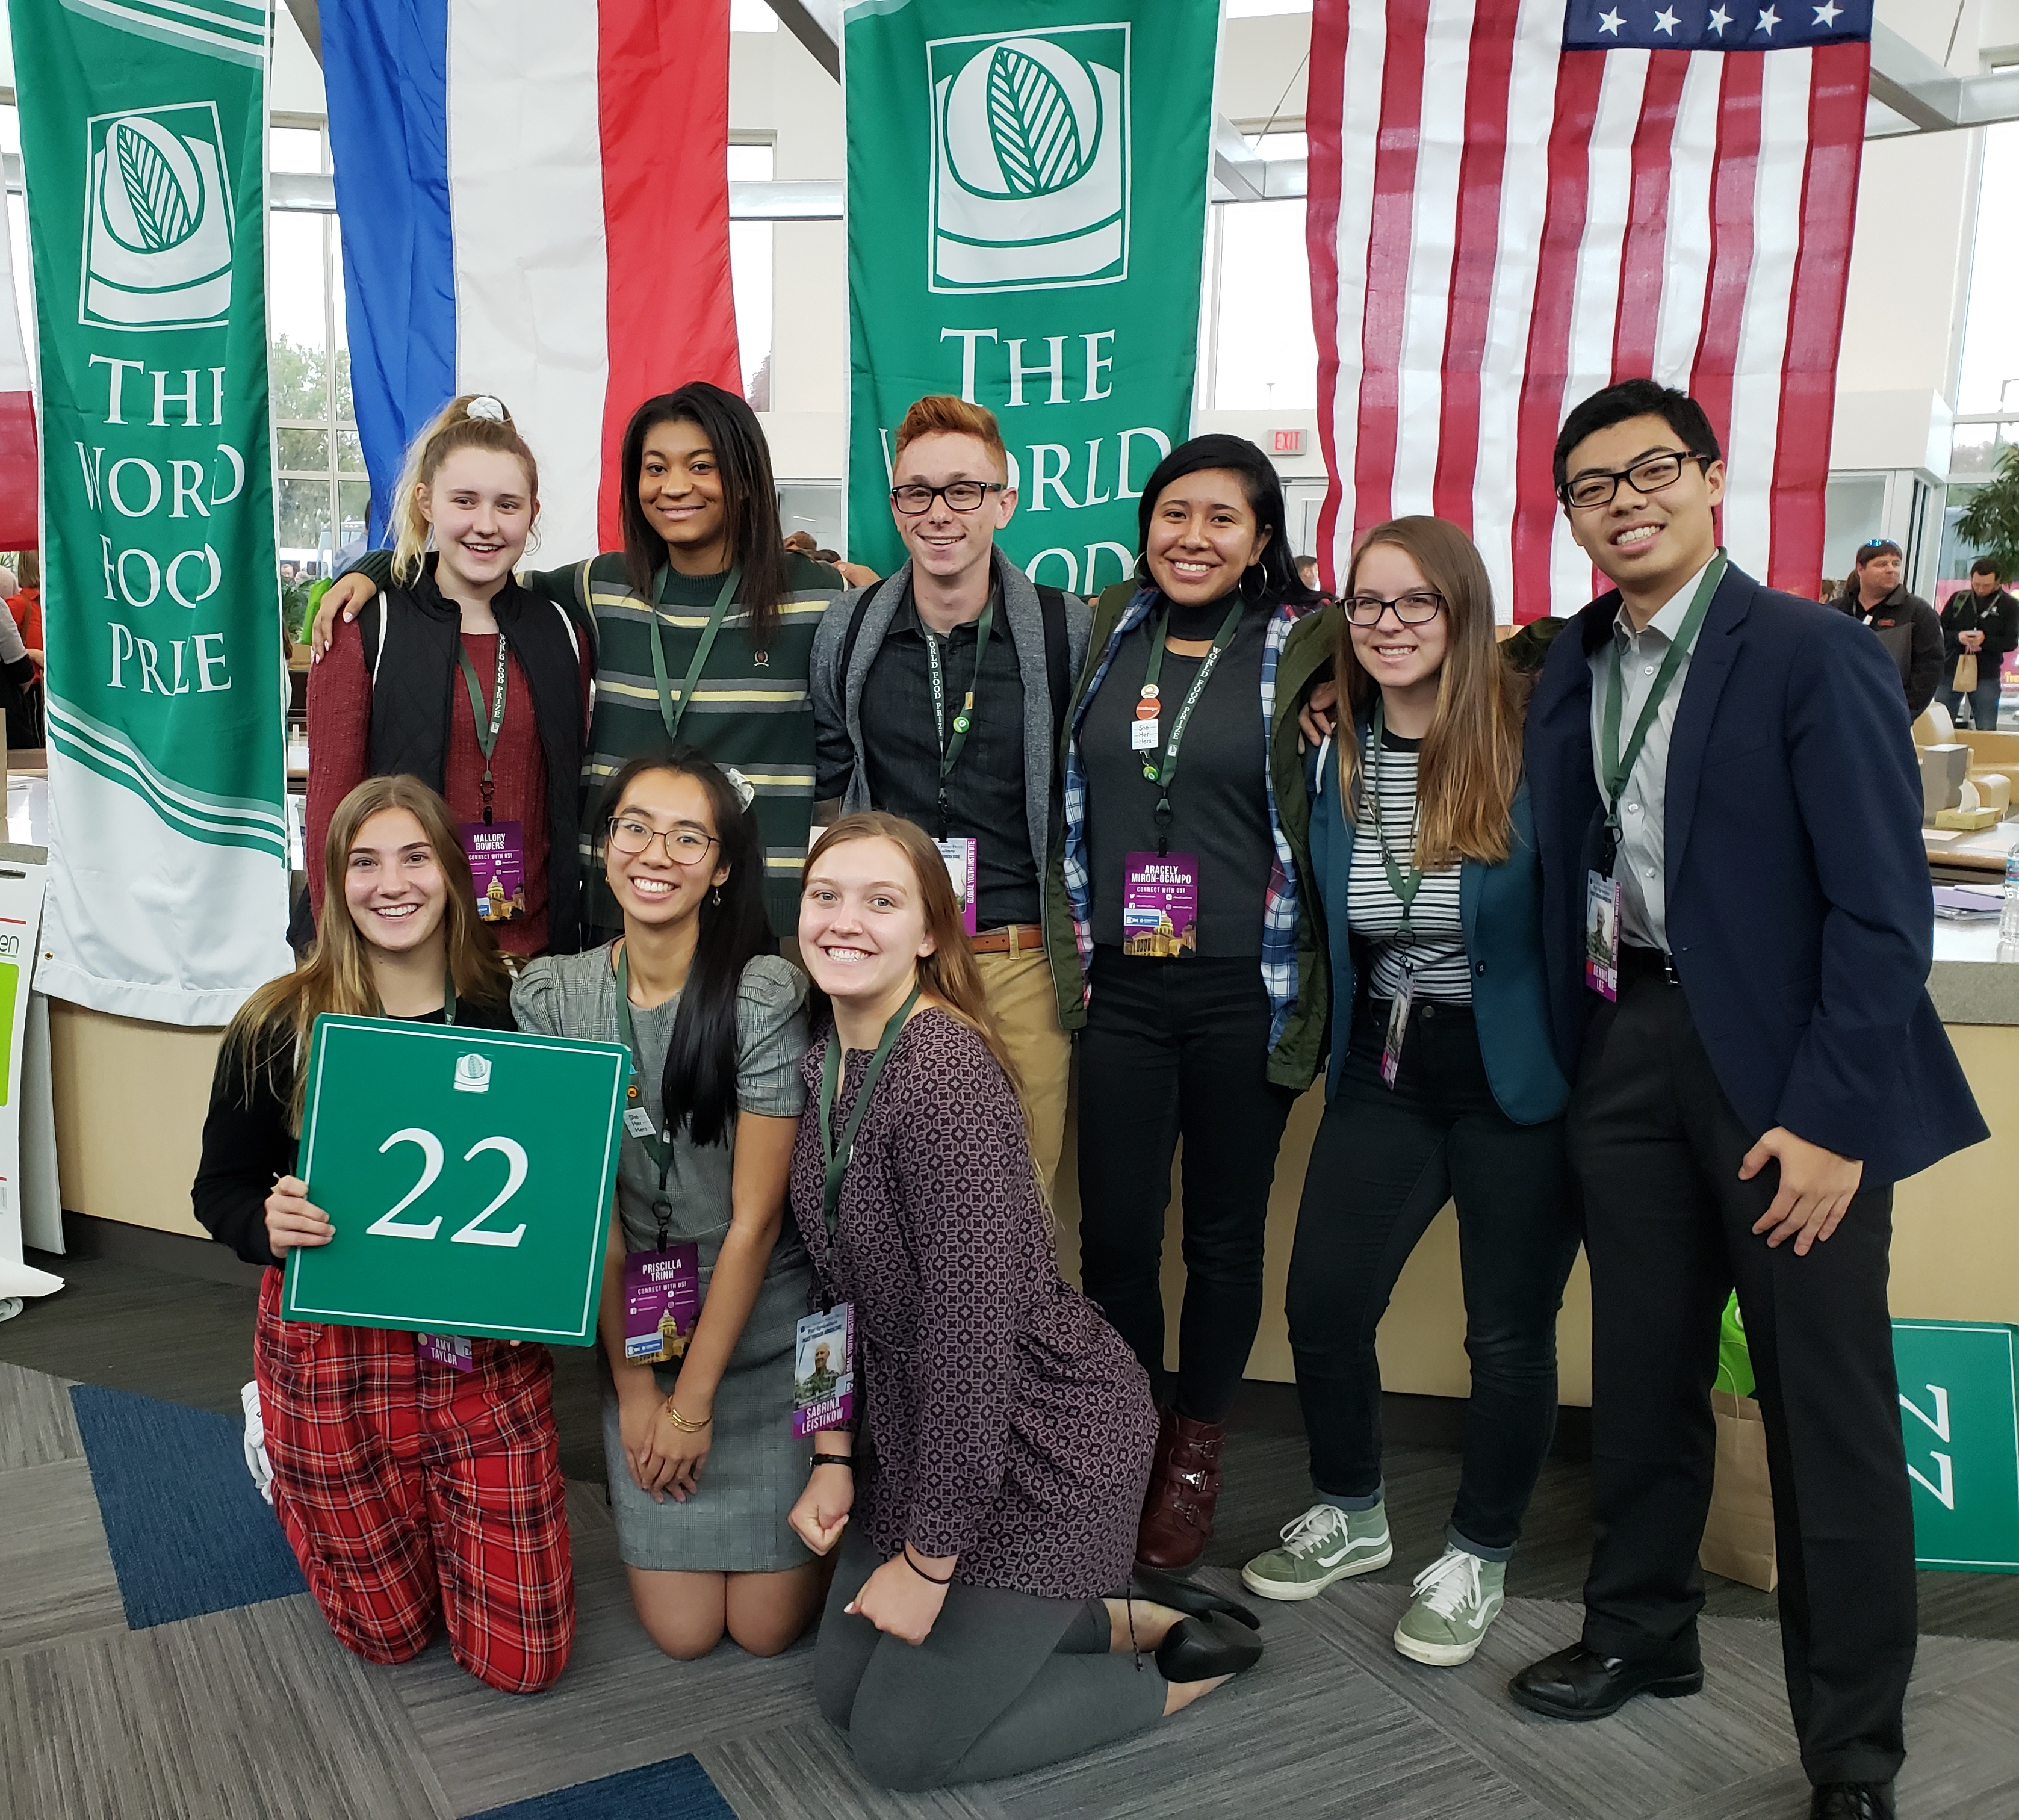 A group of multicultural students posing in front of international flags